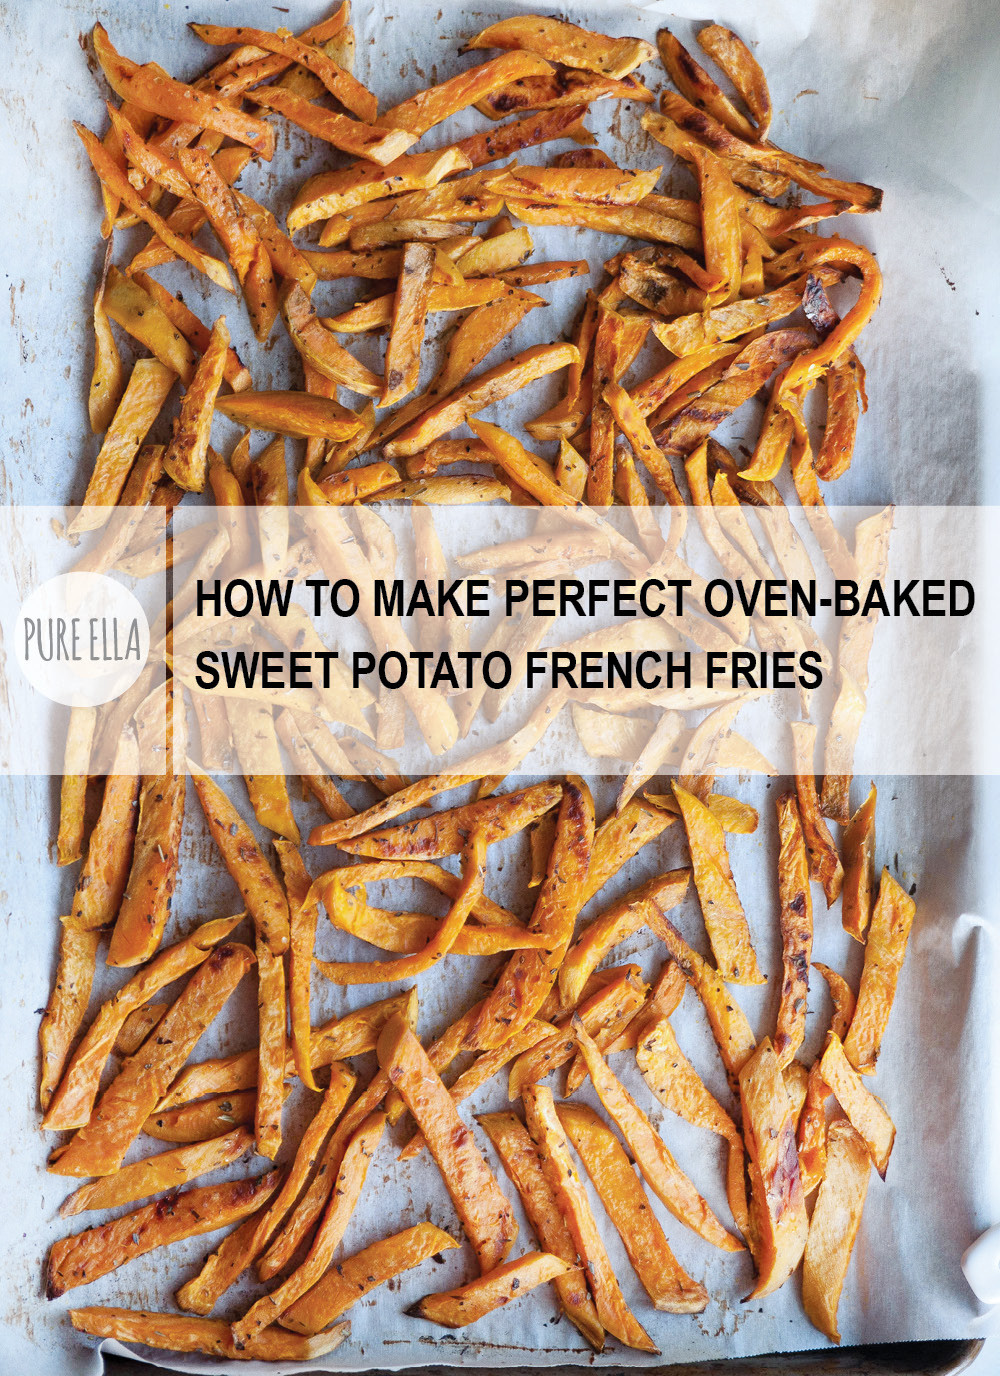 How To Make A Baked Potato In The Oven
 How to Make Perfect Oven Baked Sweet Potato French Fries